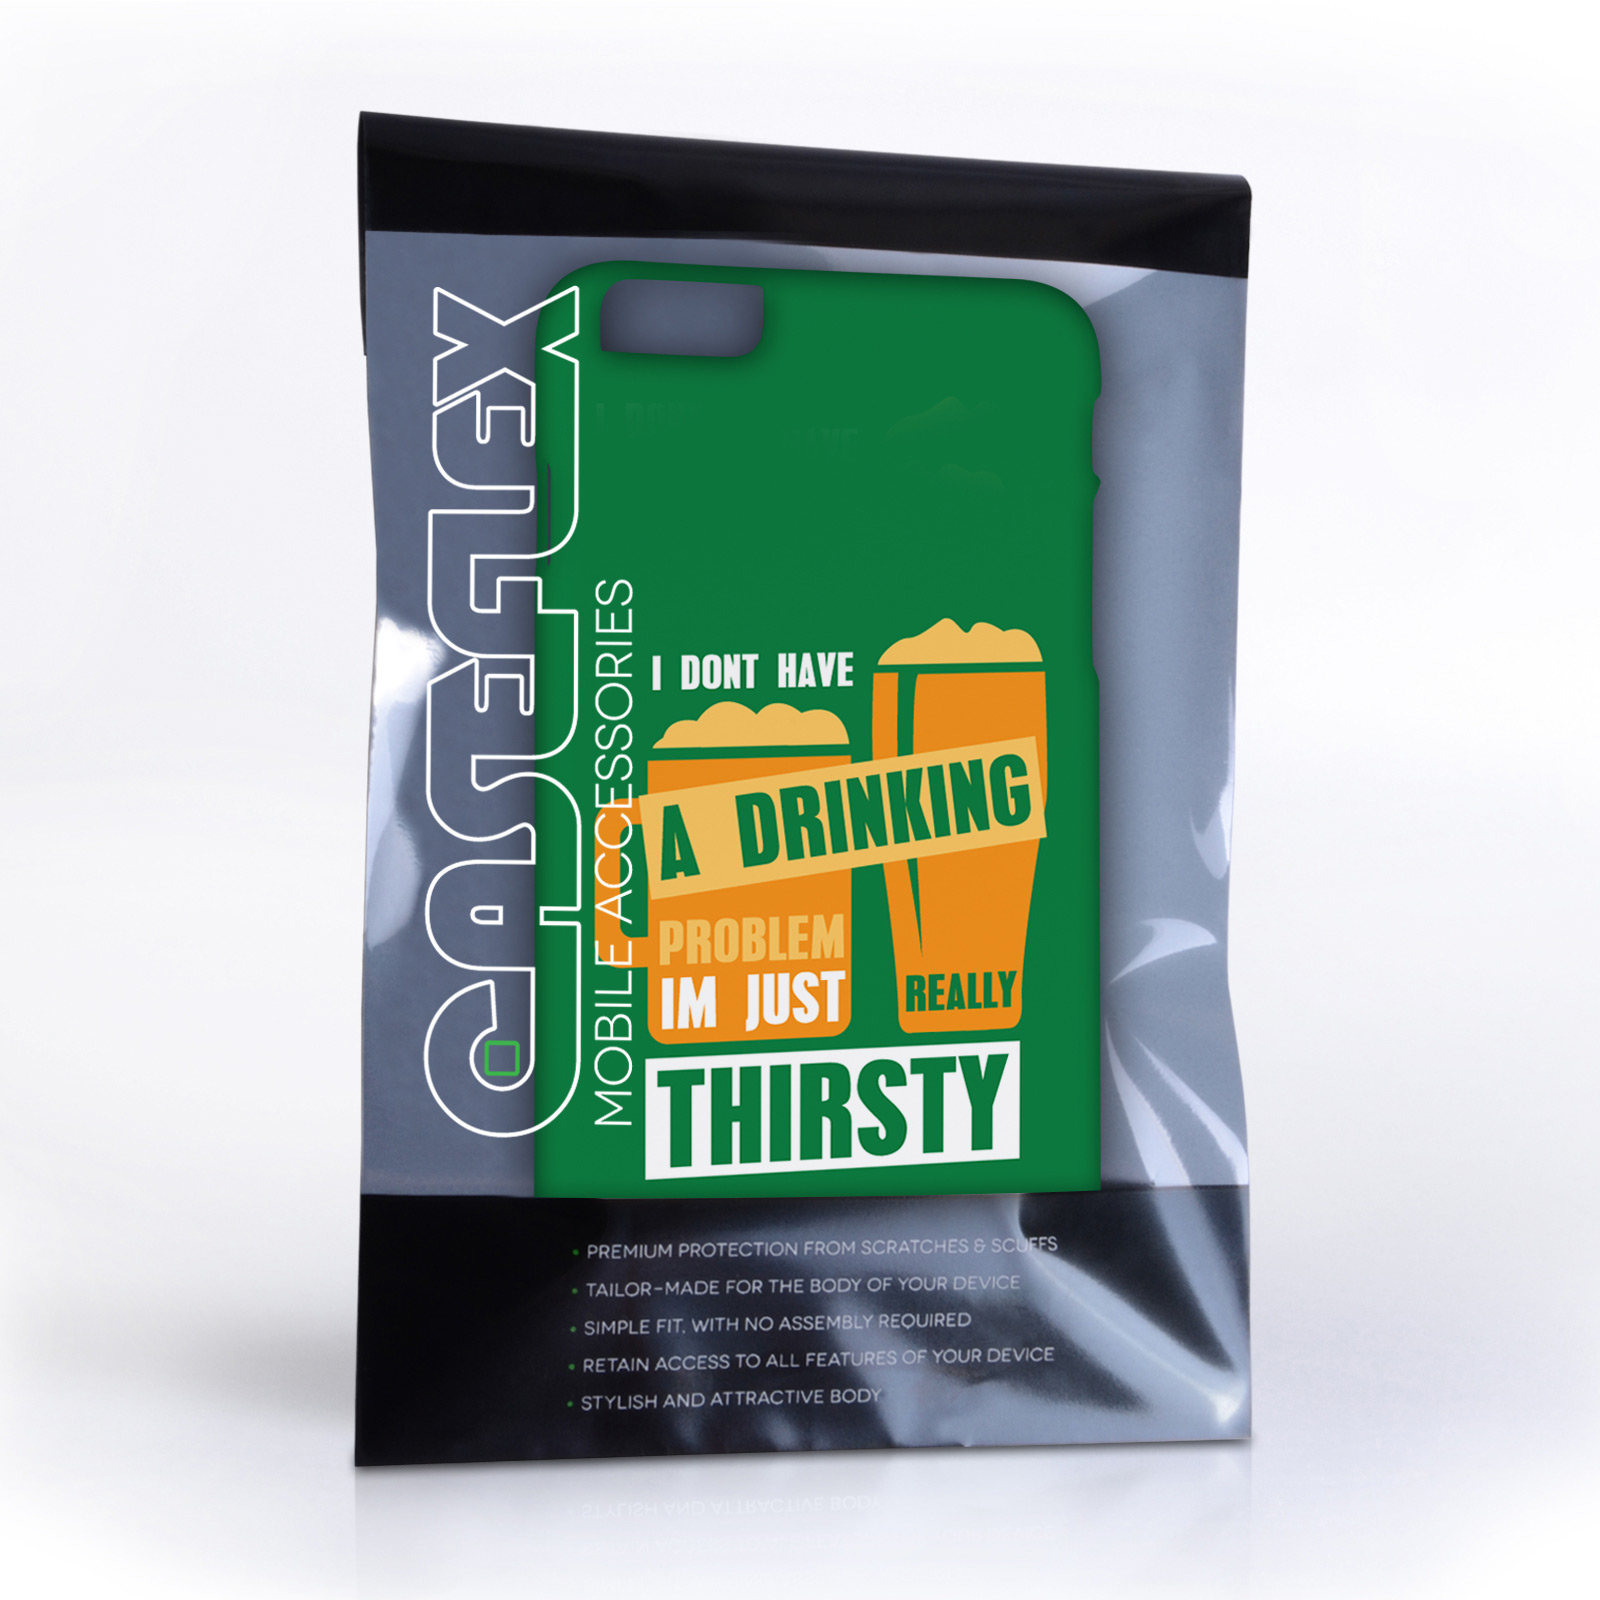 Caseflex iPhone 6 Plus and 6s Plus ‘Really Thirsty’ Quote Hard Case – Green